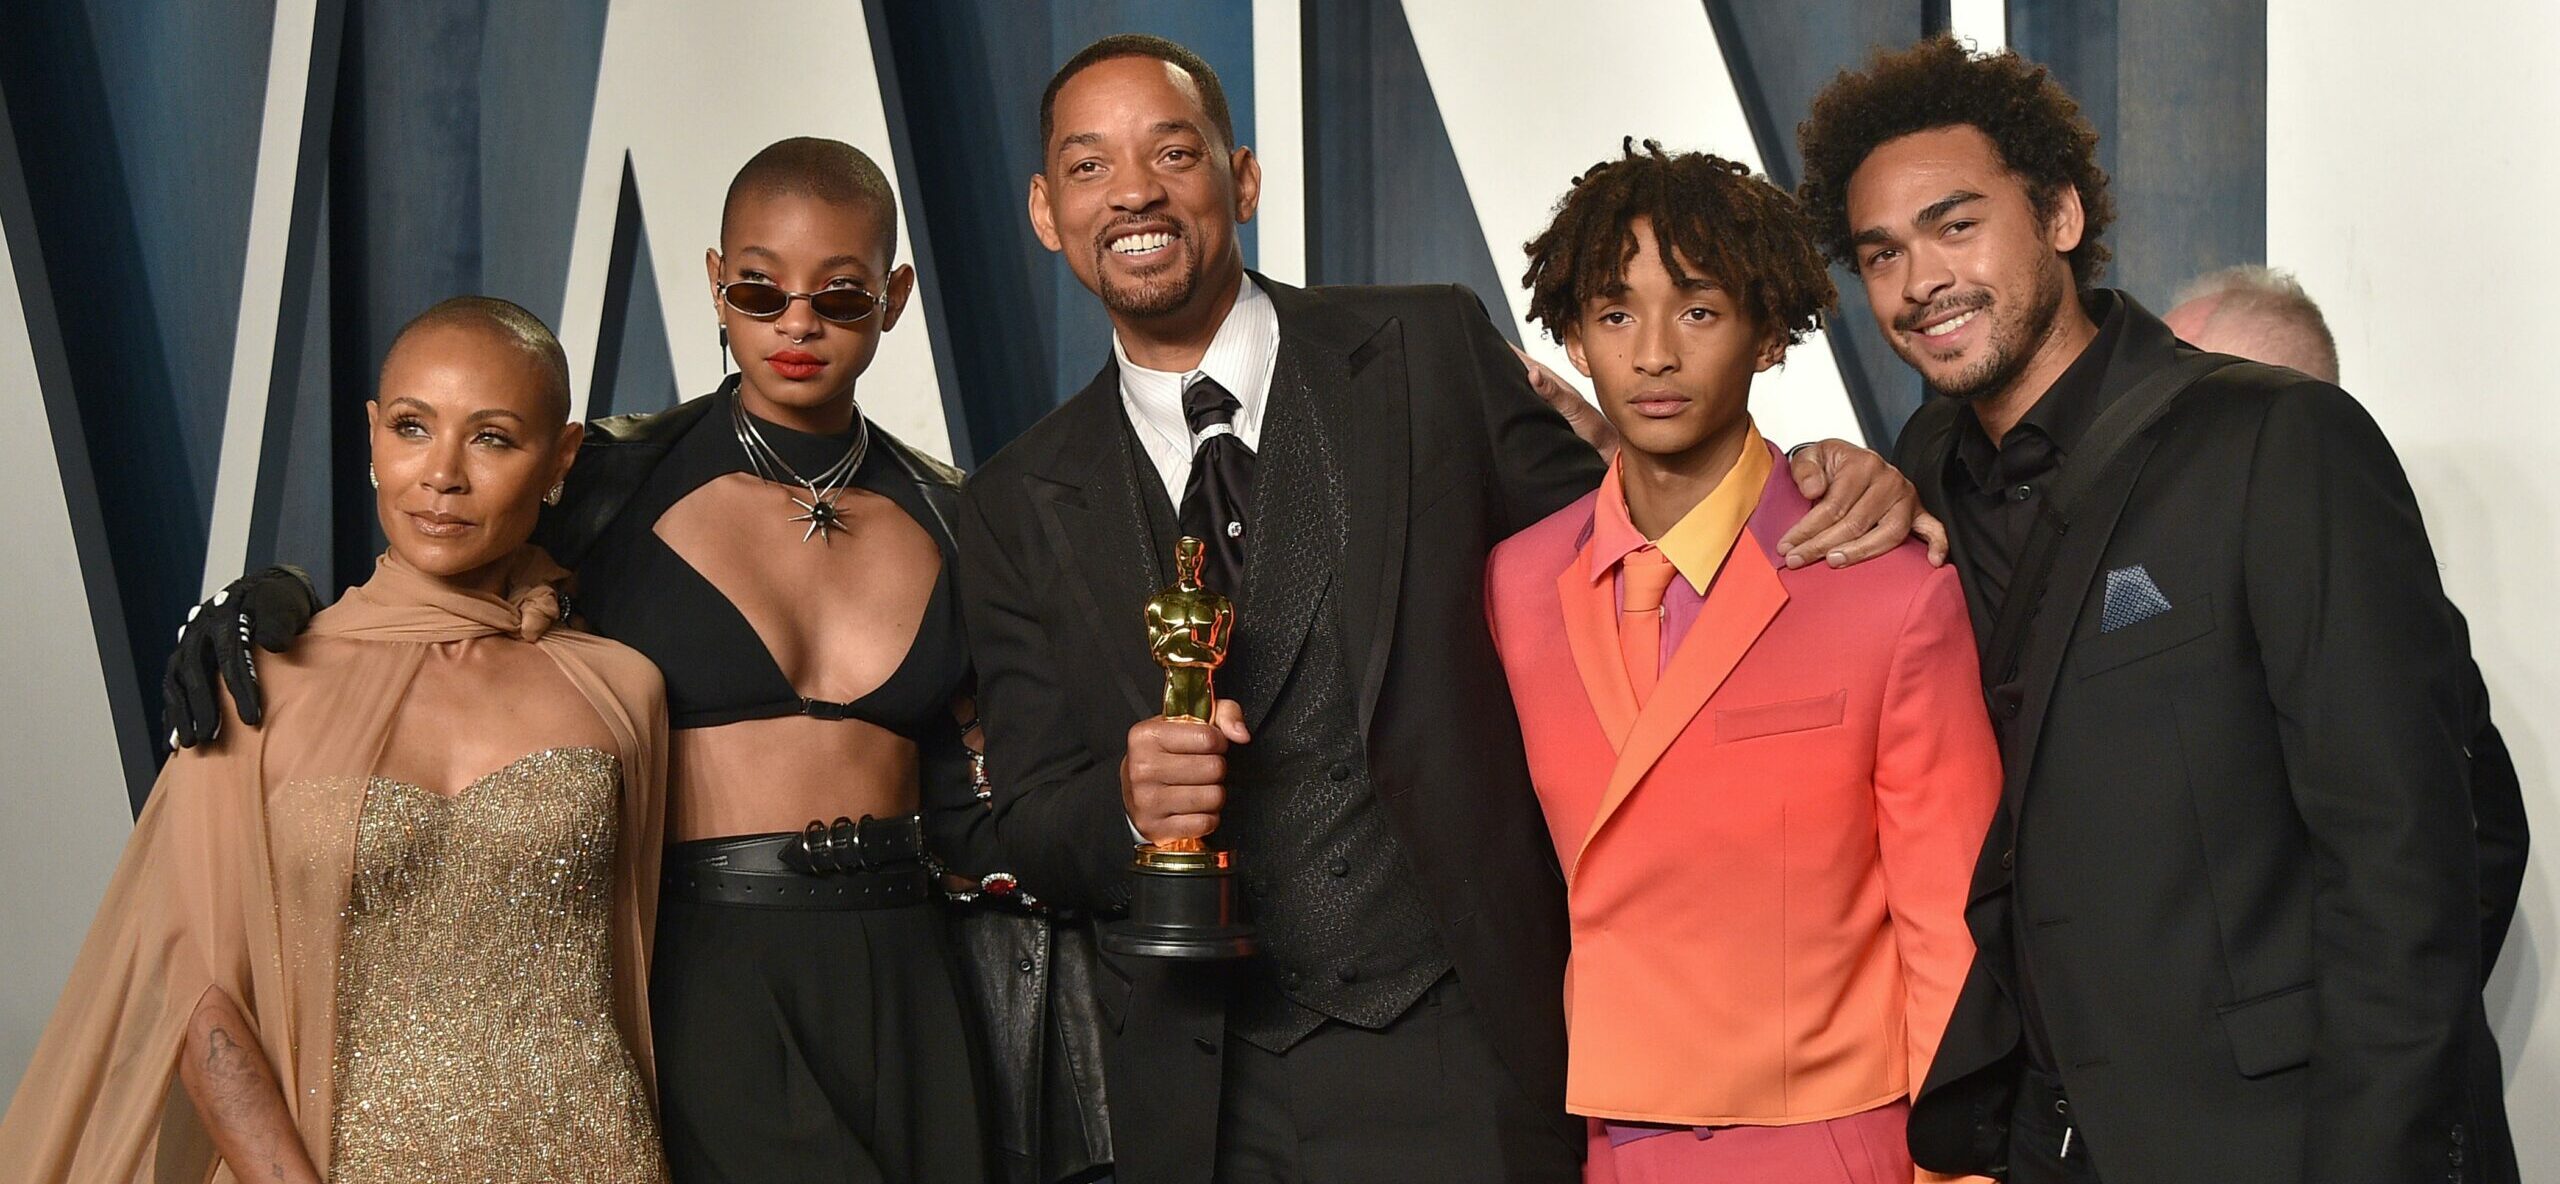 Willow Smith Breaks Silence About Dad’S Oscar Scandal 